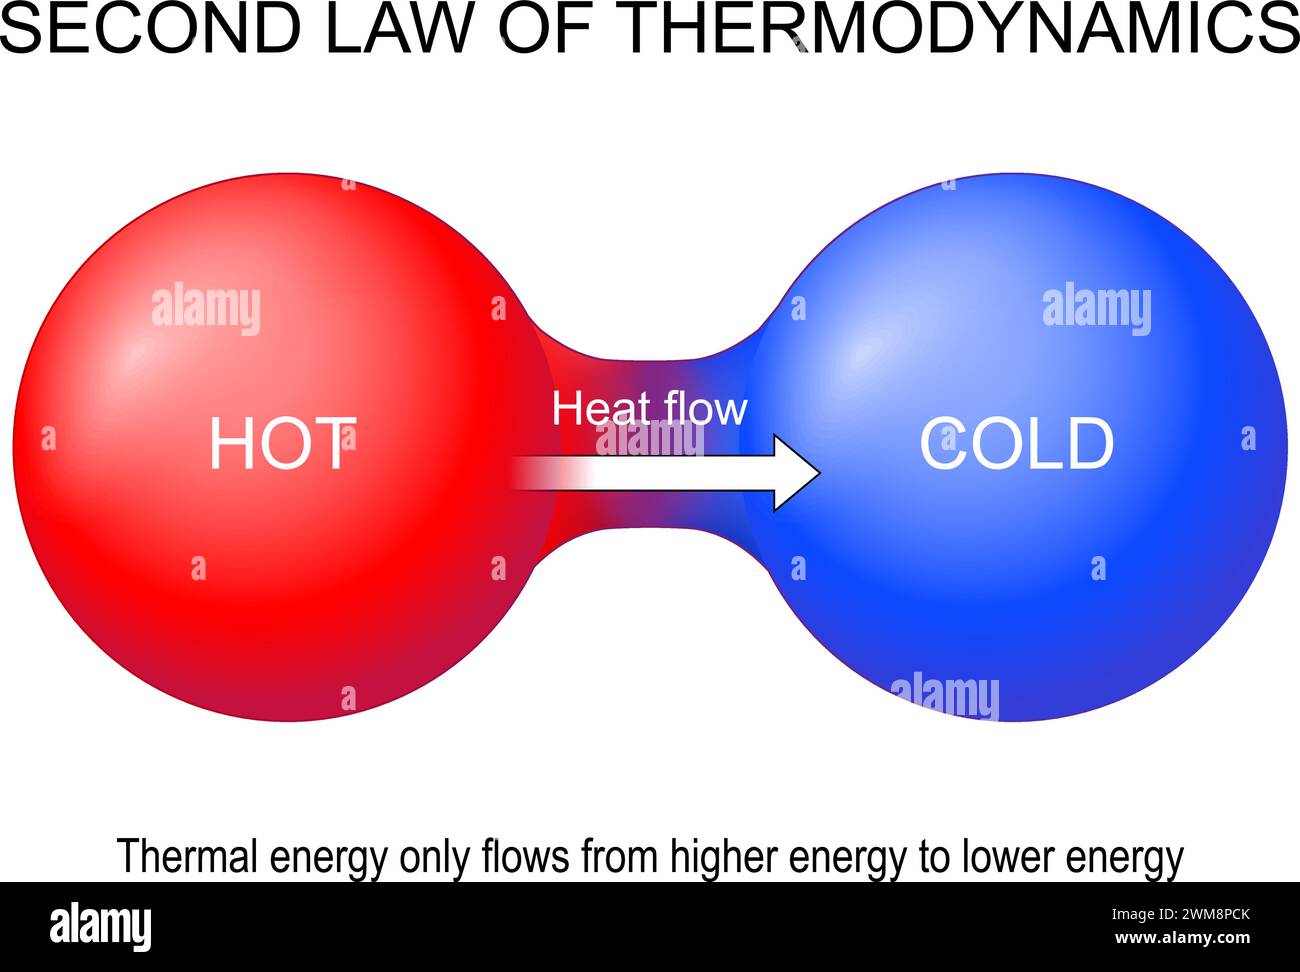 Second law of thermodynamics. Thermal energy only flows from higher energy to lower energy. Heat transfer. Entropy generation. Thermal equilibrium. Ve Stock Vector